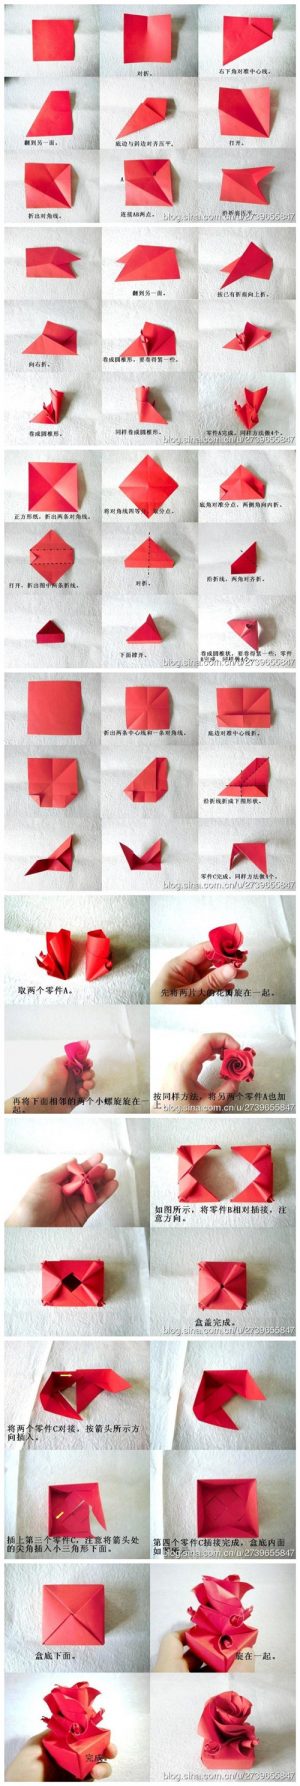 Origami Diy Step By Step How To Fold Cute Origami Paper Craft Rose Box For Valentines Day